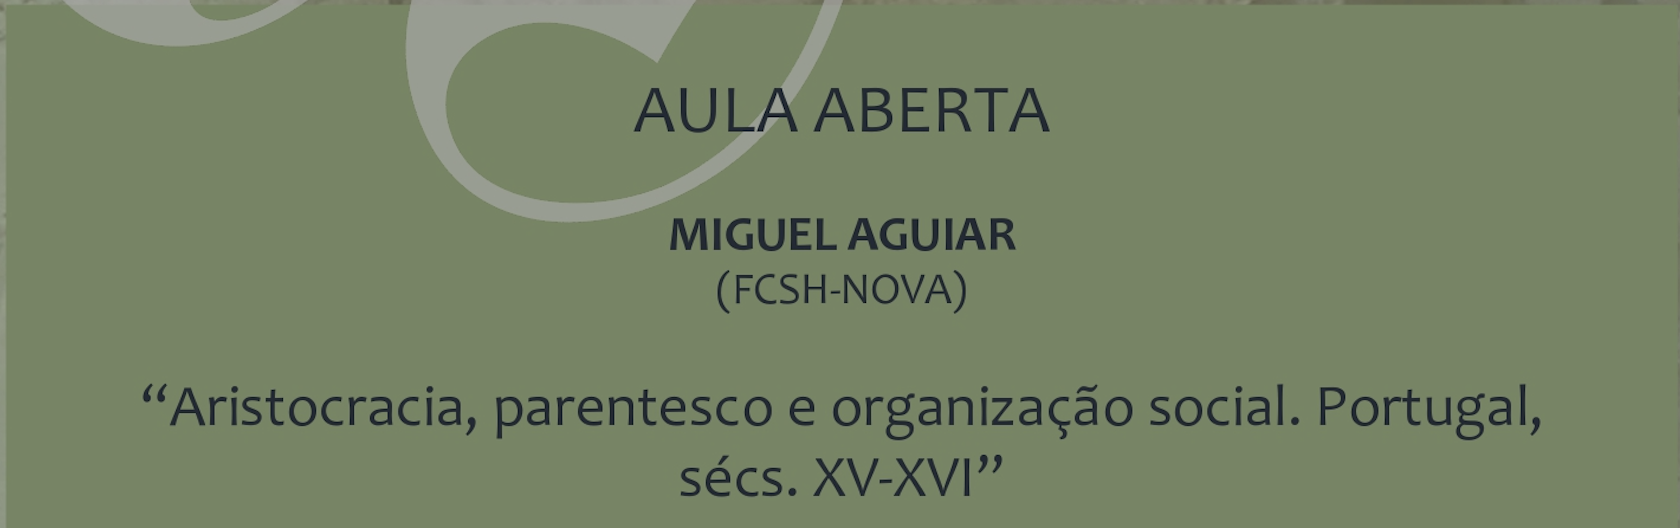 Open lecture by Miguel Aguiar